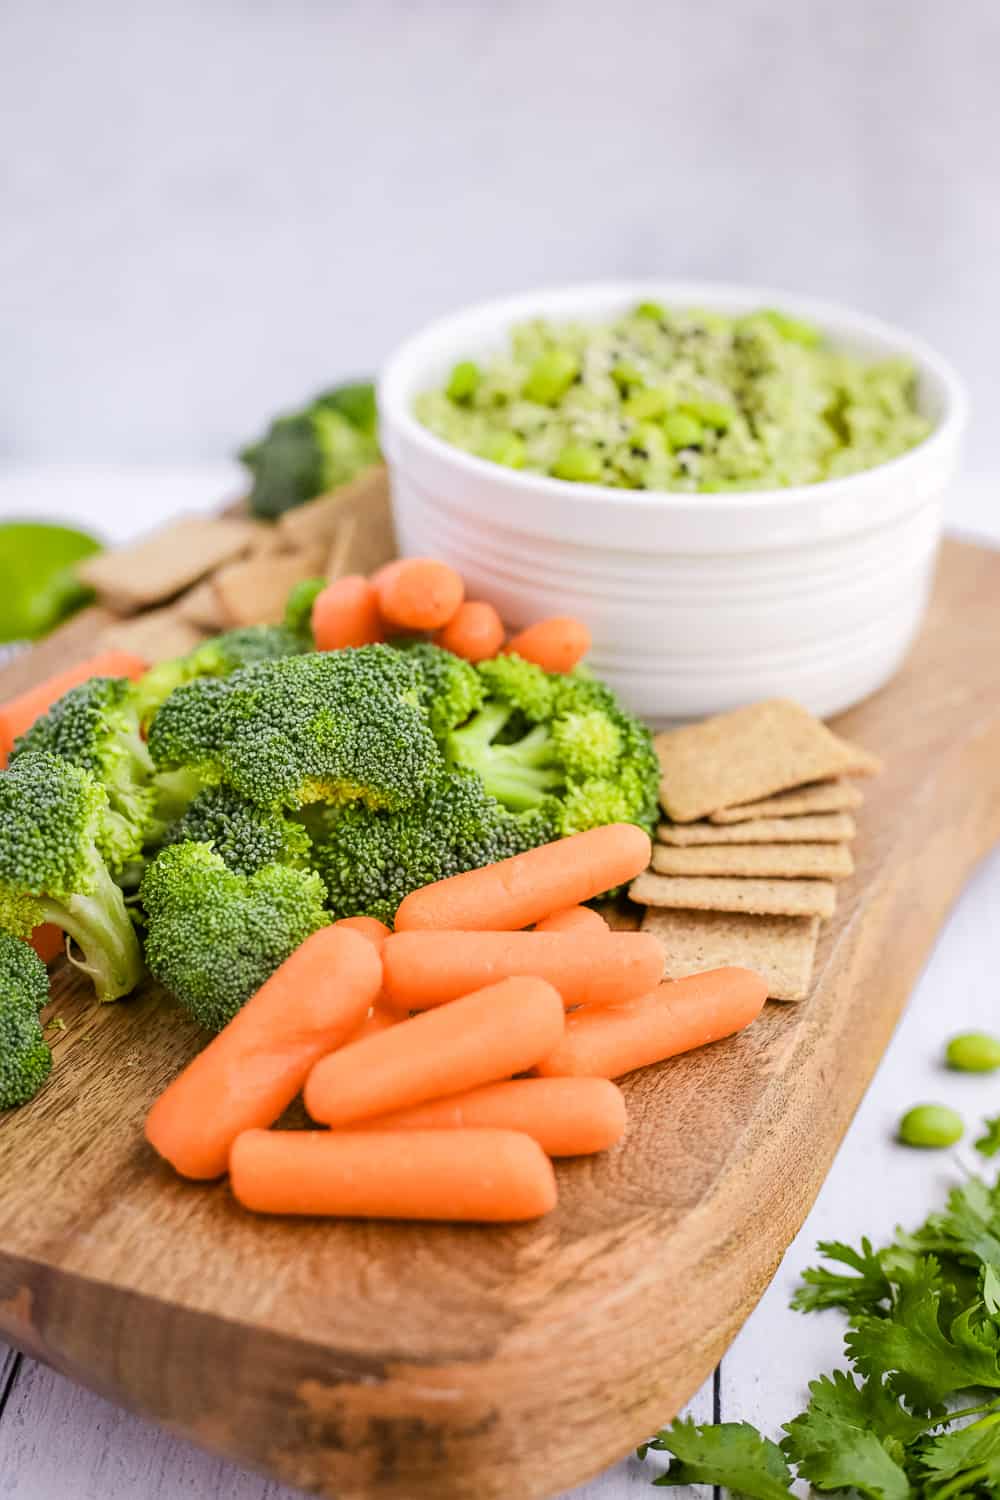 A wooden serving platter with carrots, broccoli, crackers, and a white bowl with hummus